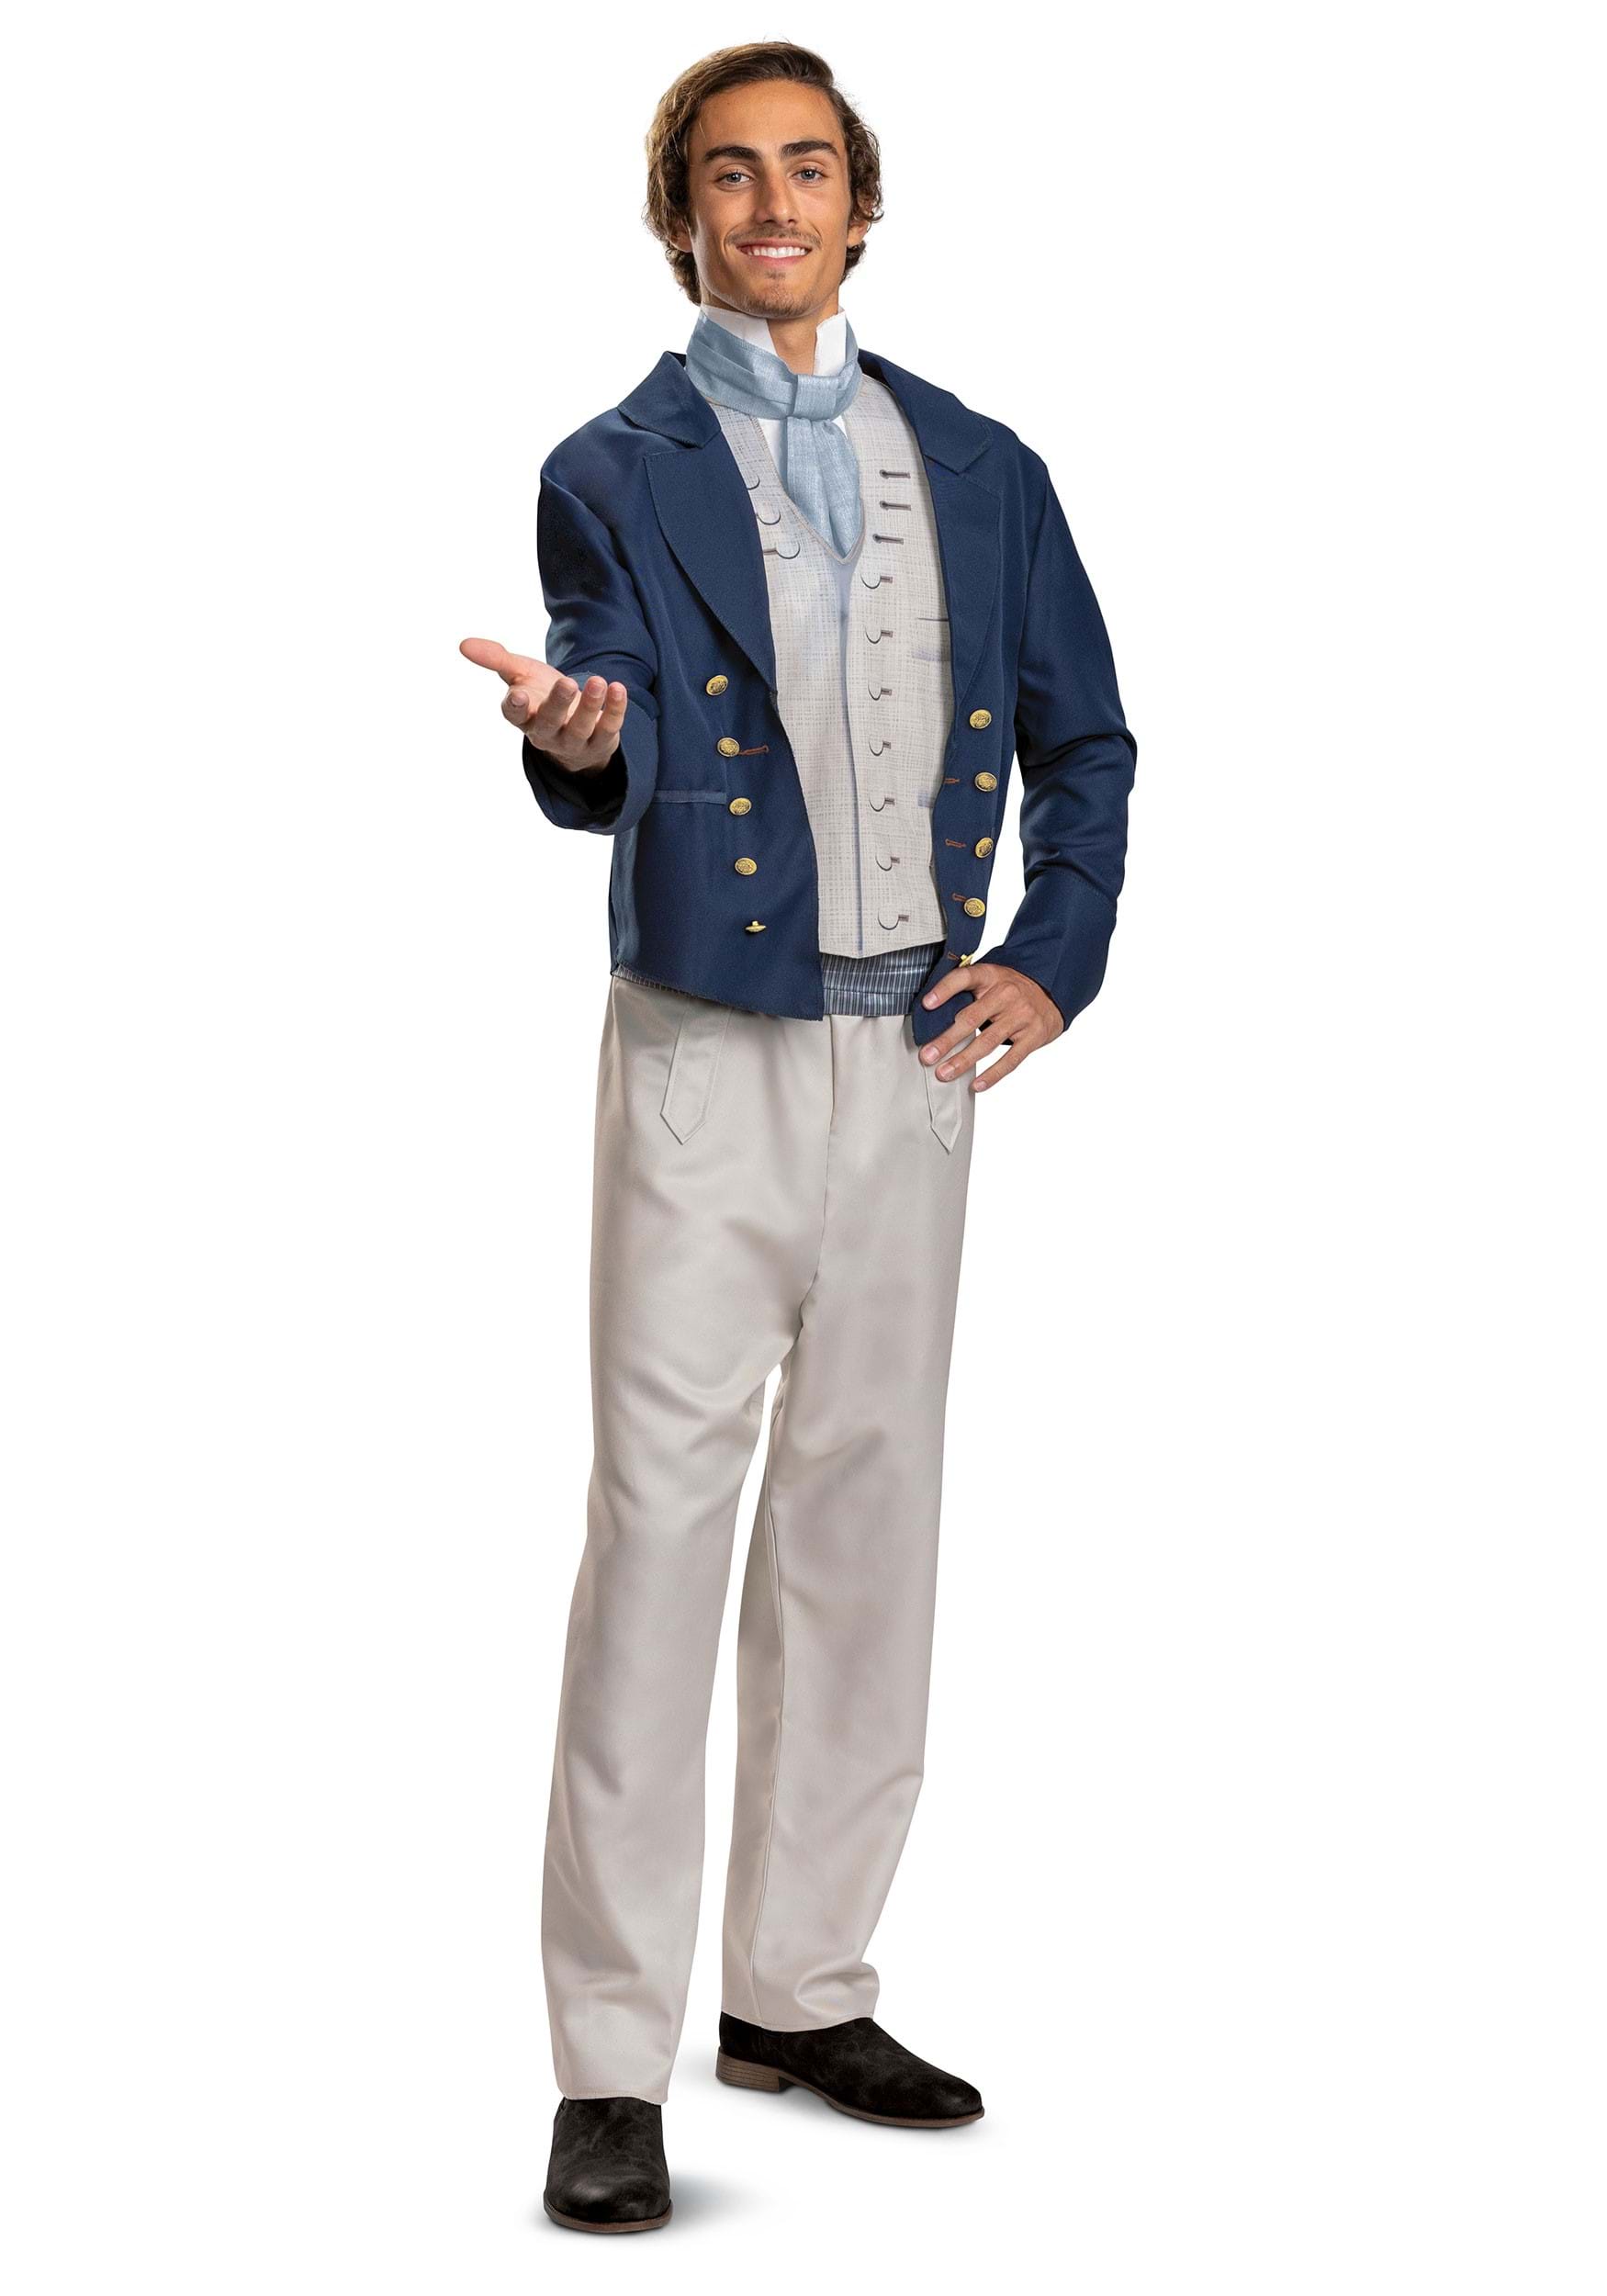 Image of Little Mermaid Live Action Deluxe Prince Eric Adult Costume ID DI125619-L/XL